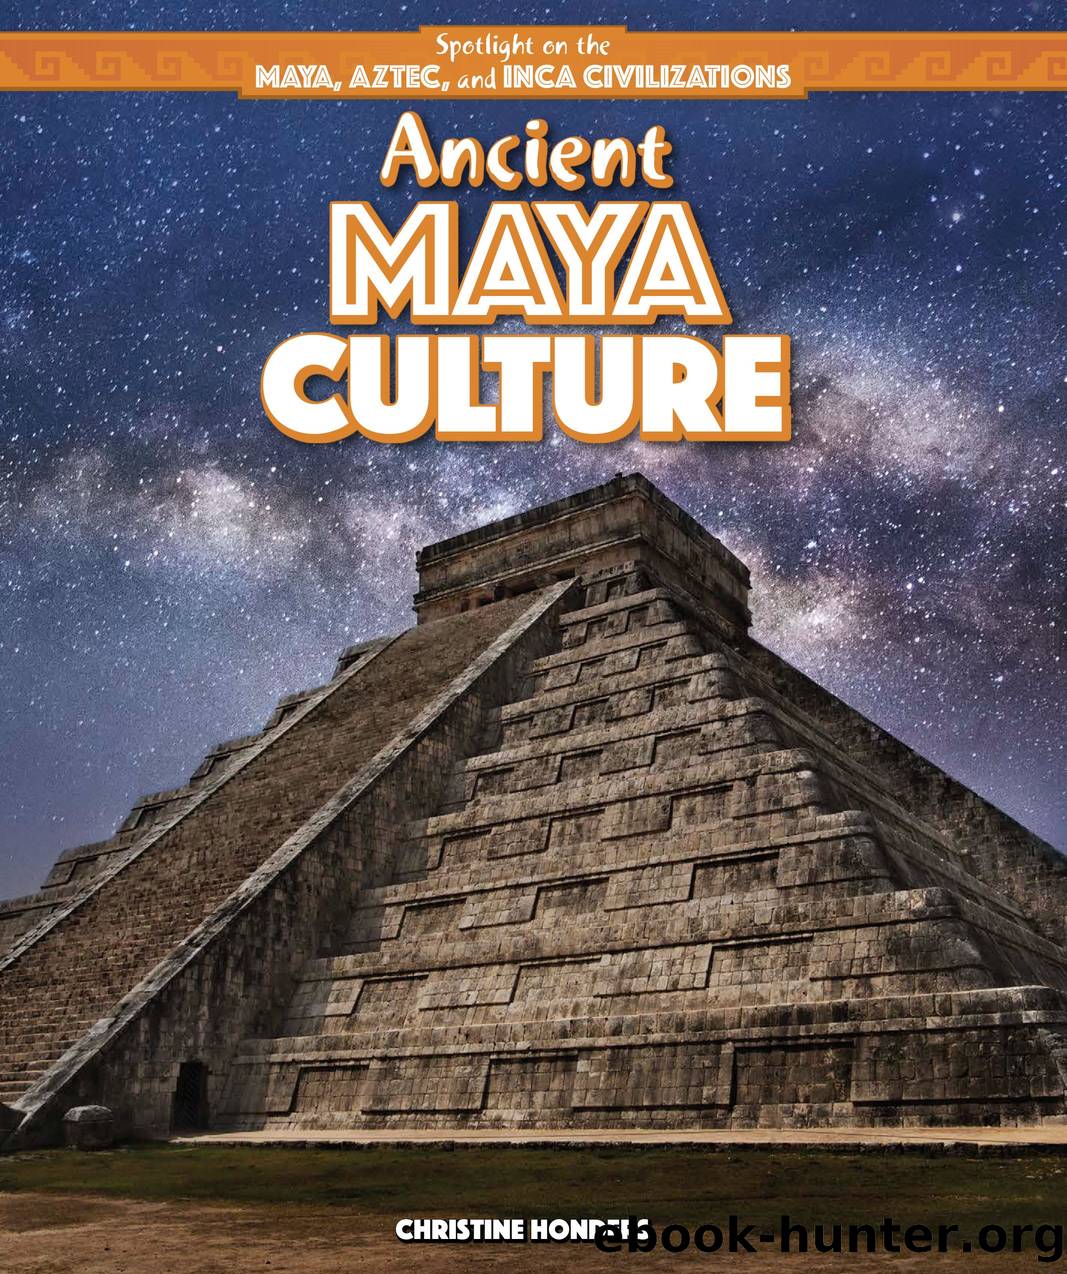 ANCIENT MAYA CULTURE by CHRISTINE HONDERS